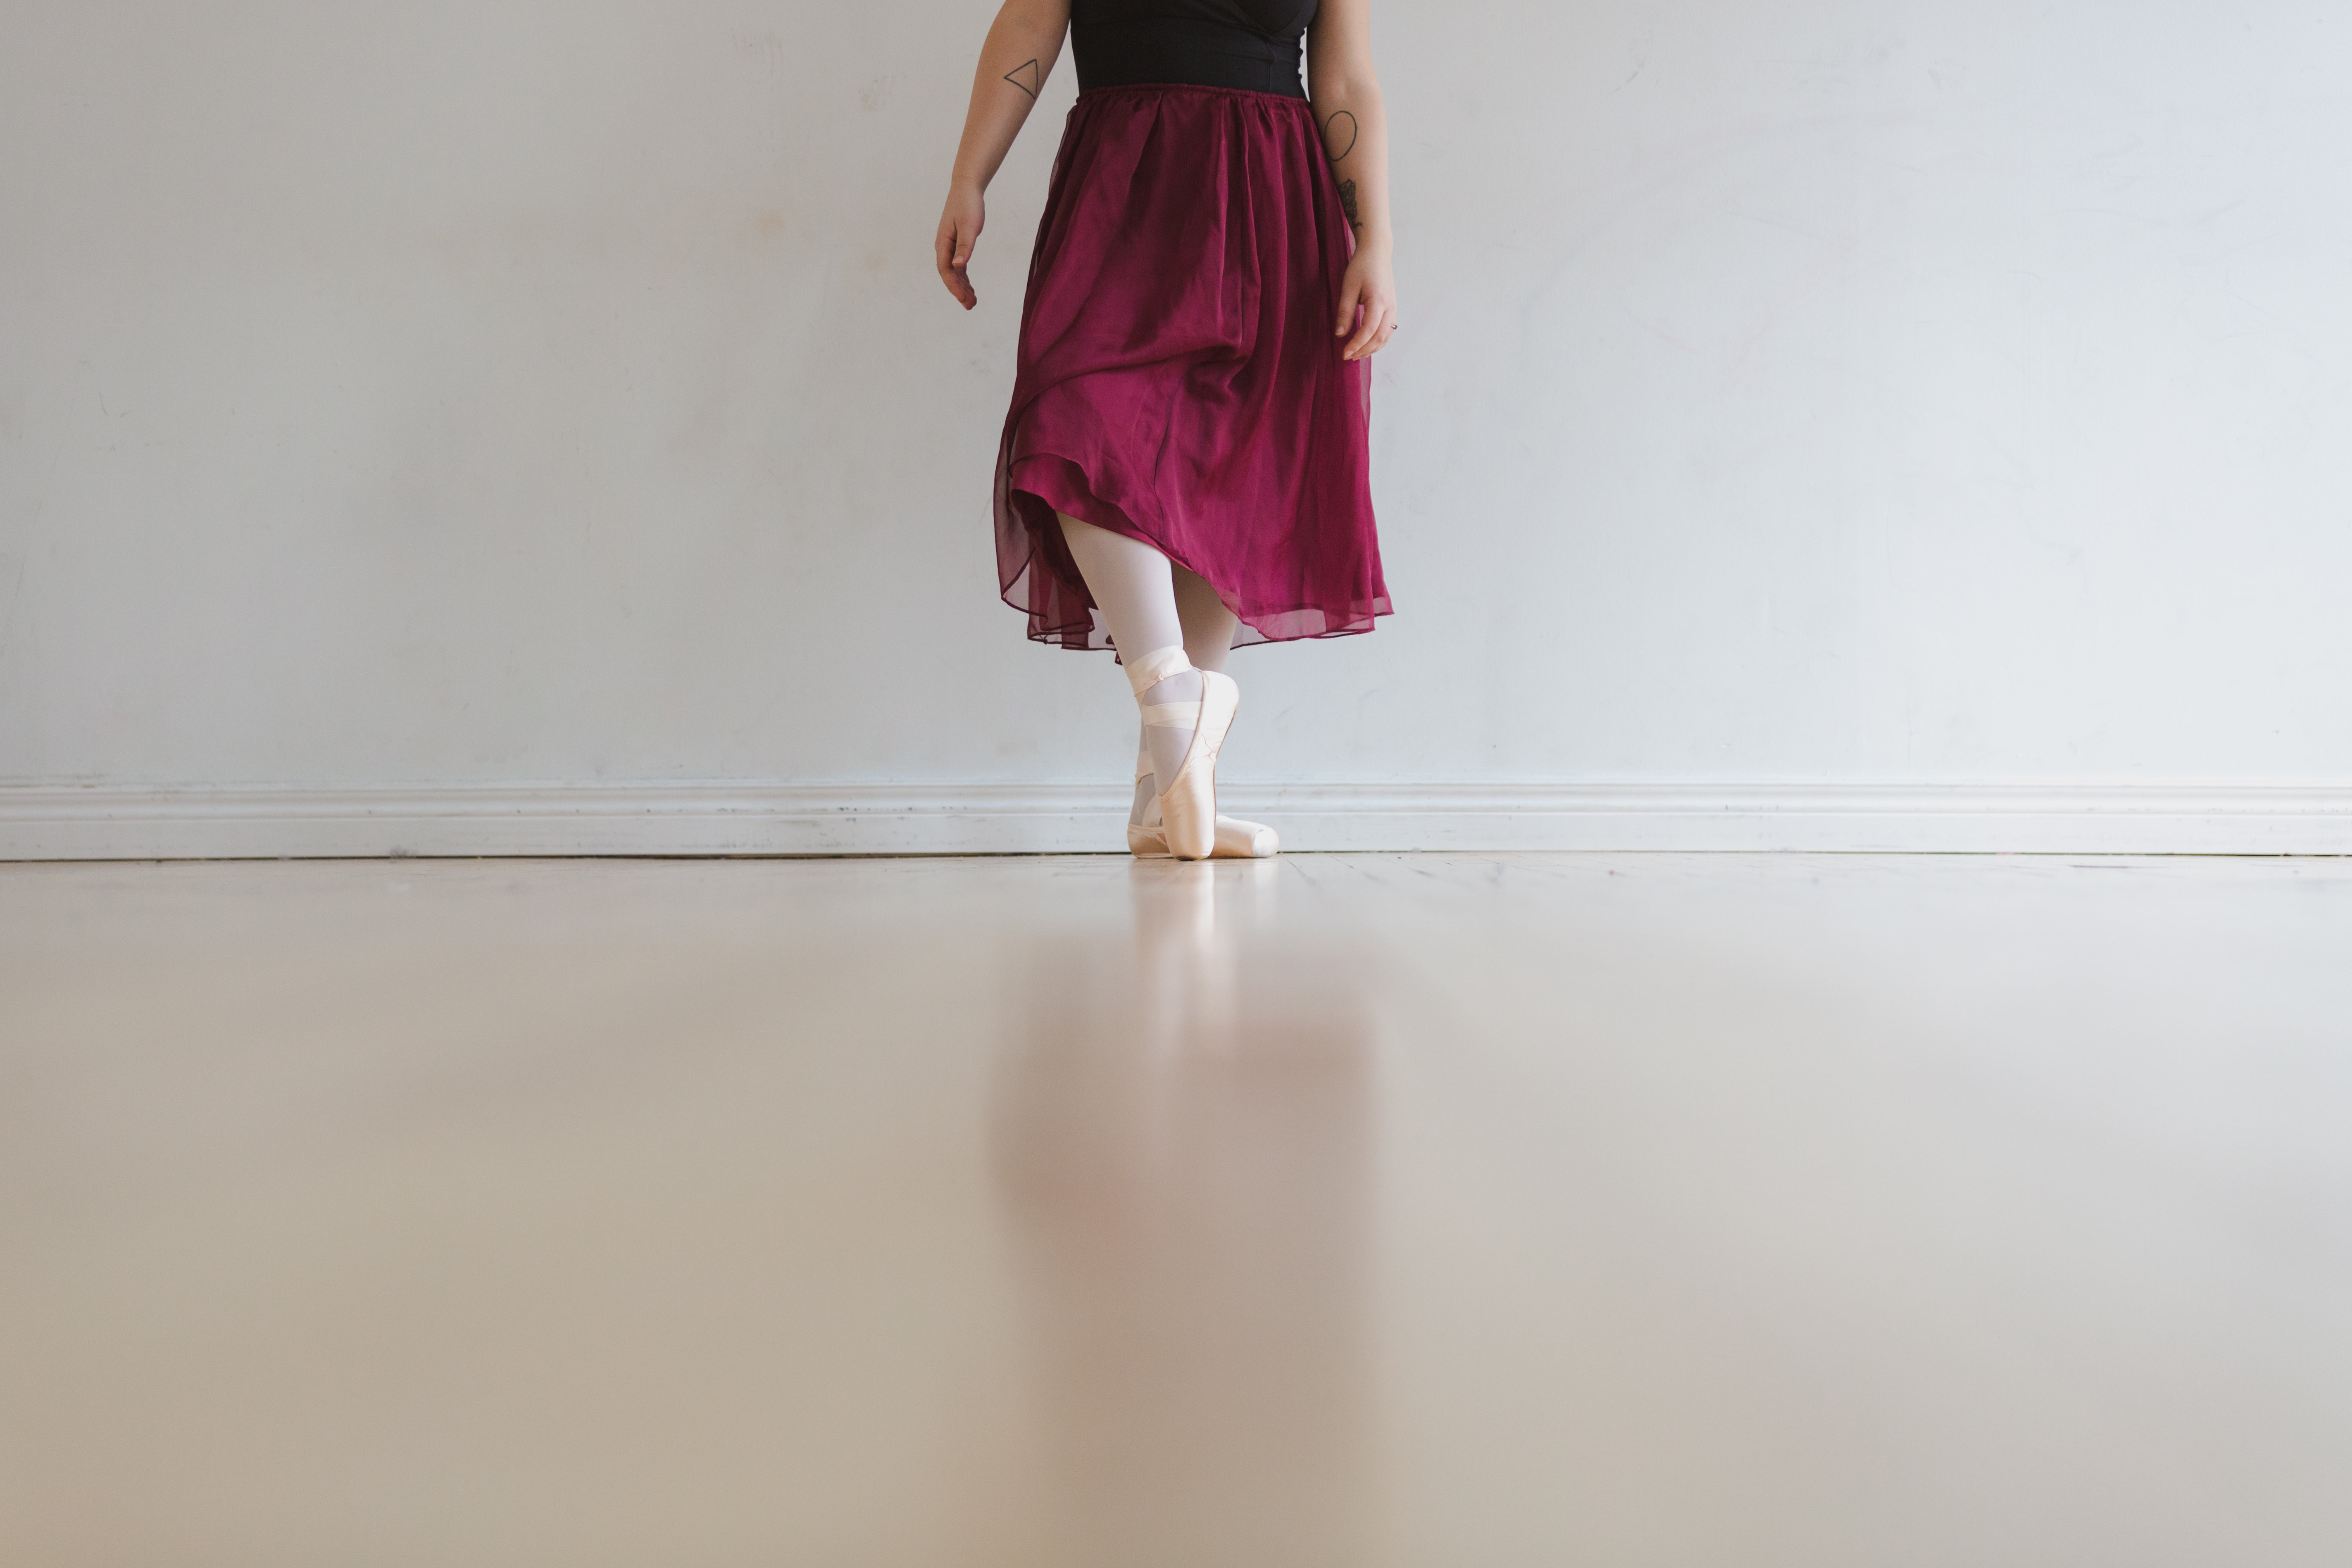 A Preteen Ballerina In Different Dance Poses